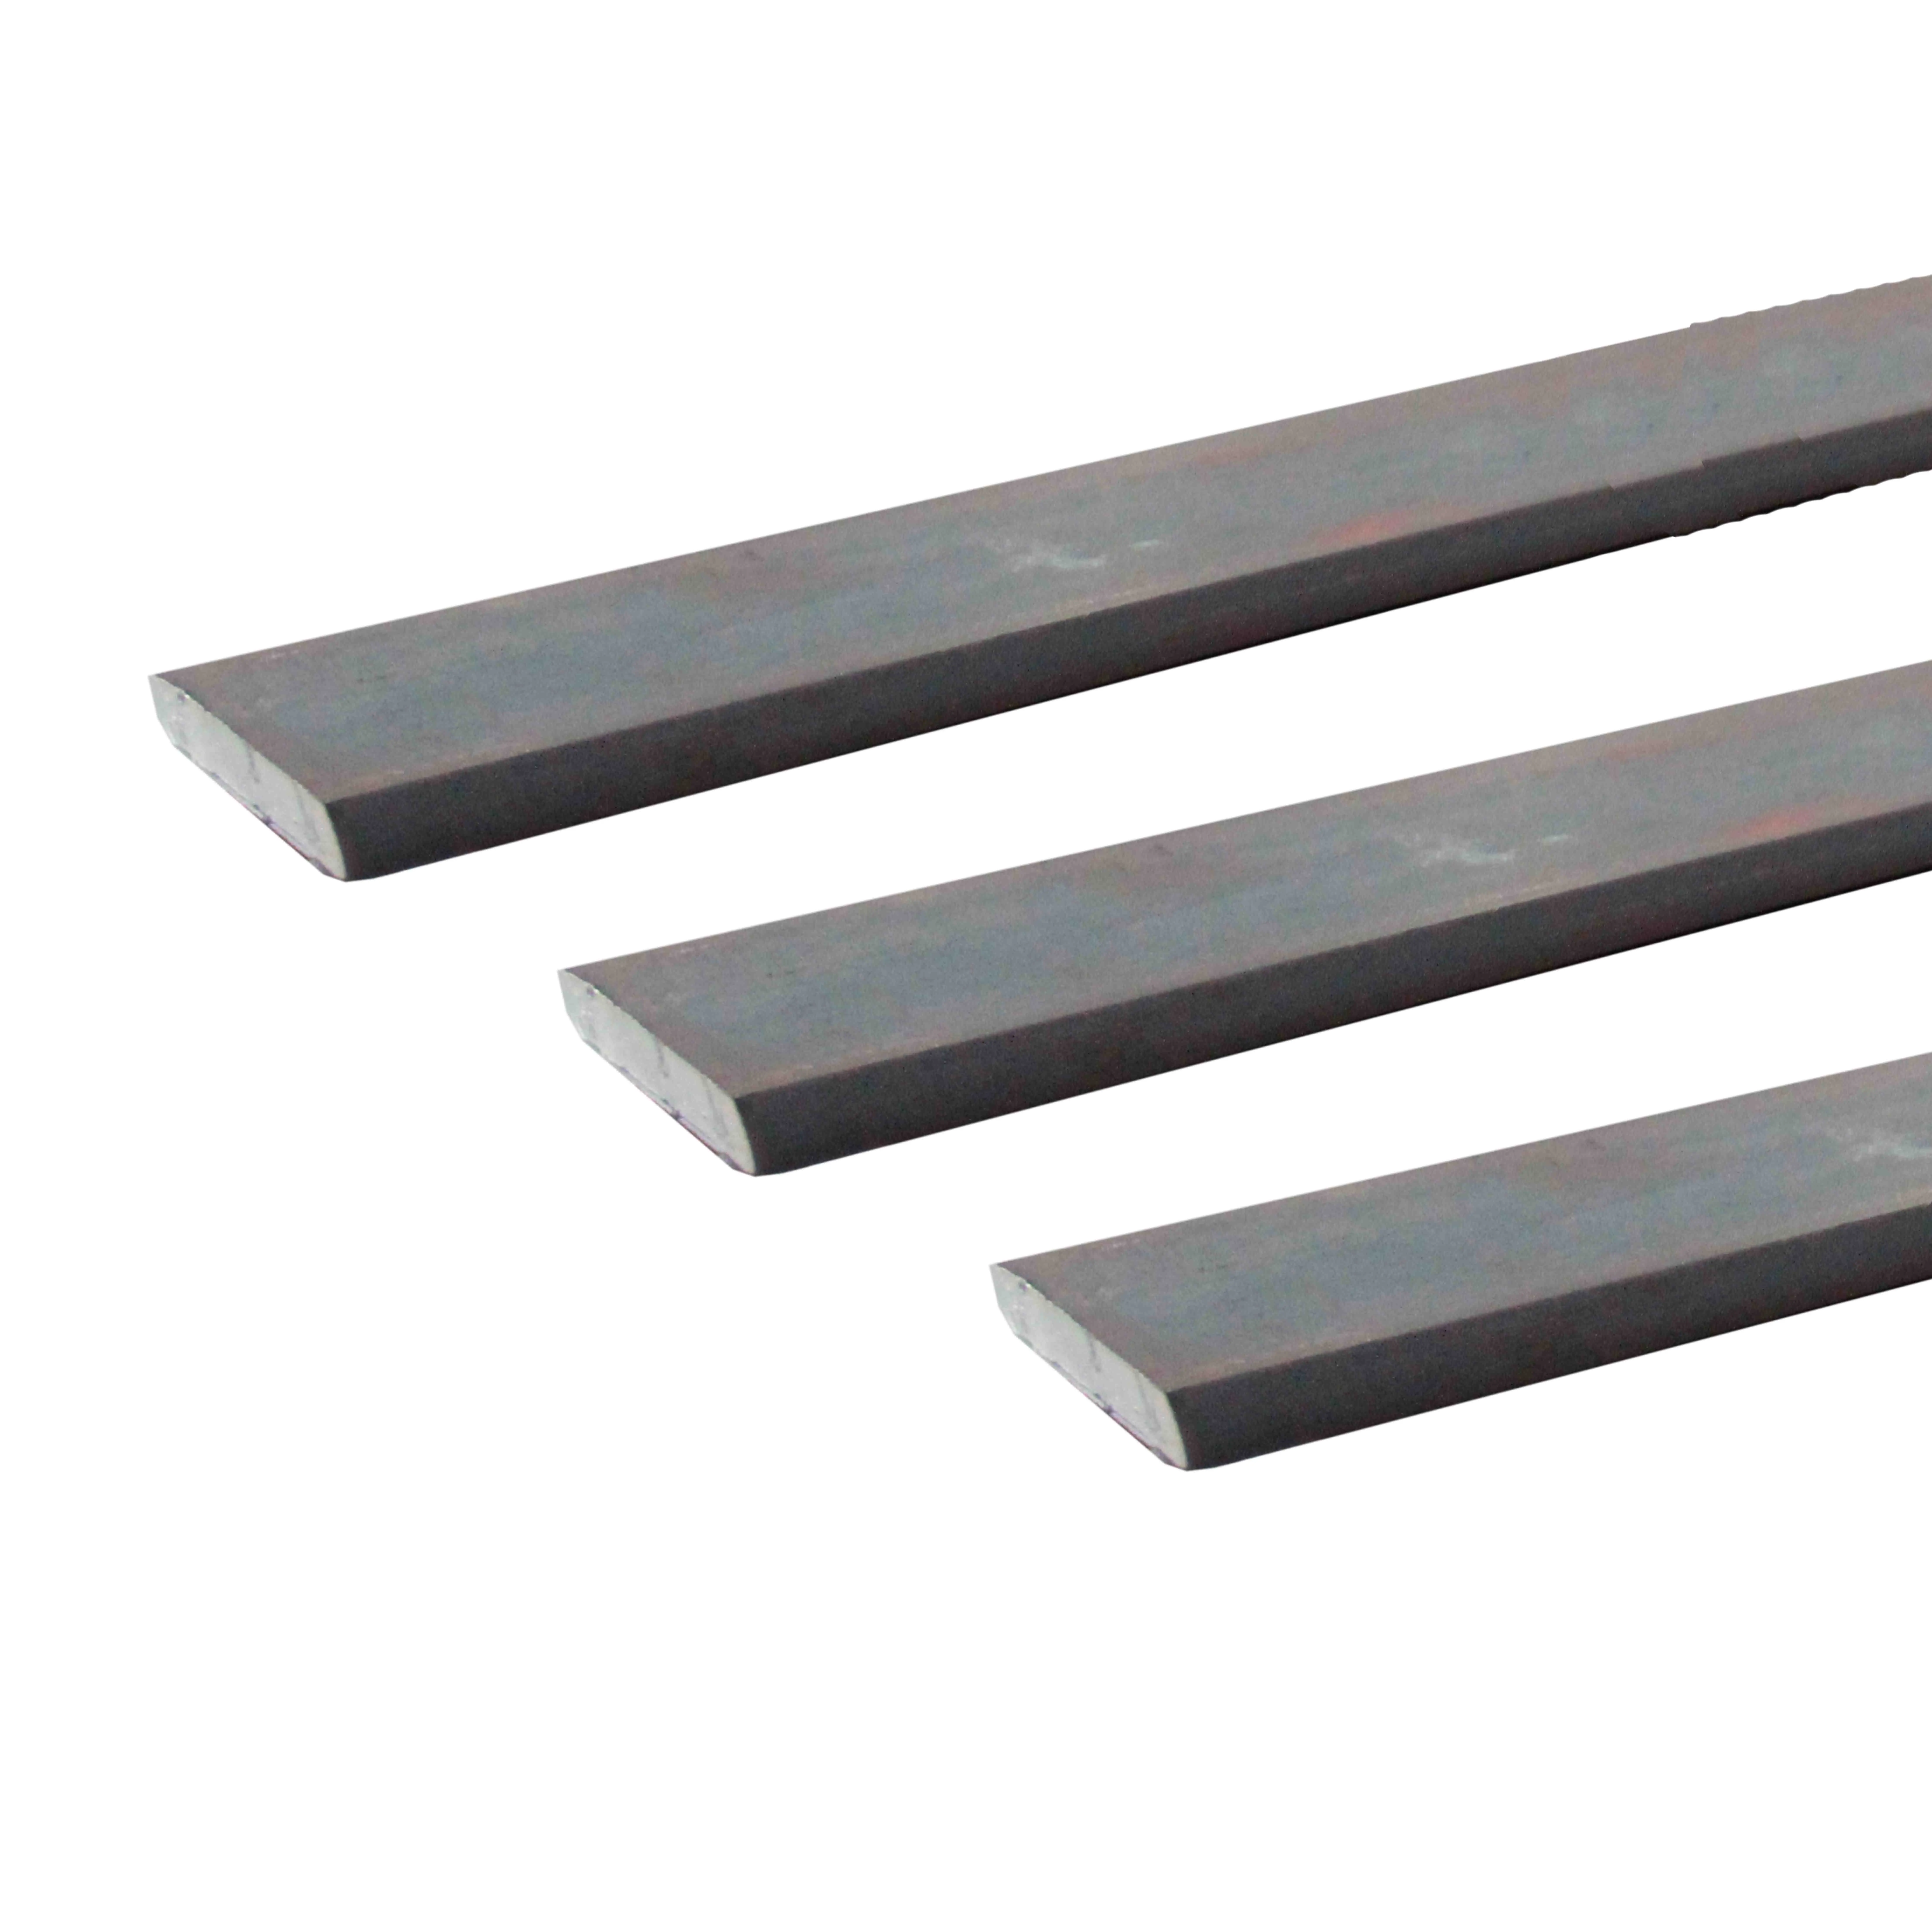 
Factory price stainless steel table carbon steel bar beams square with High speed steel 